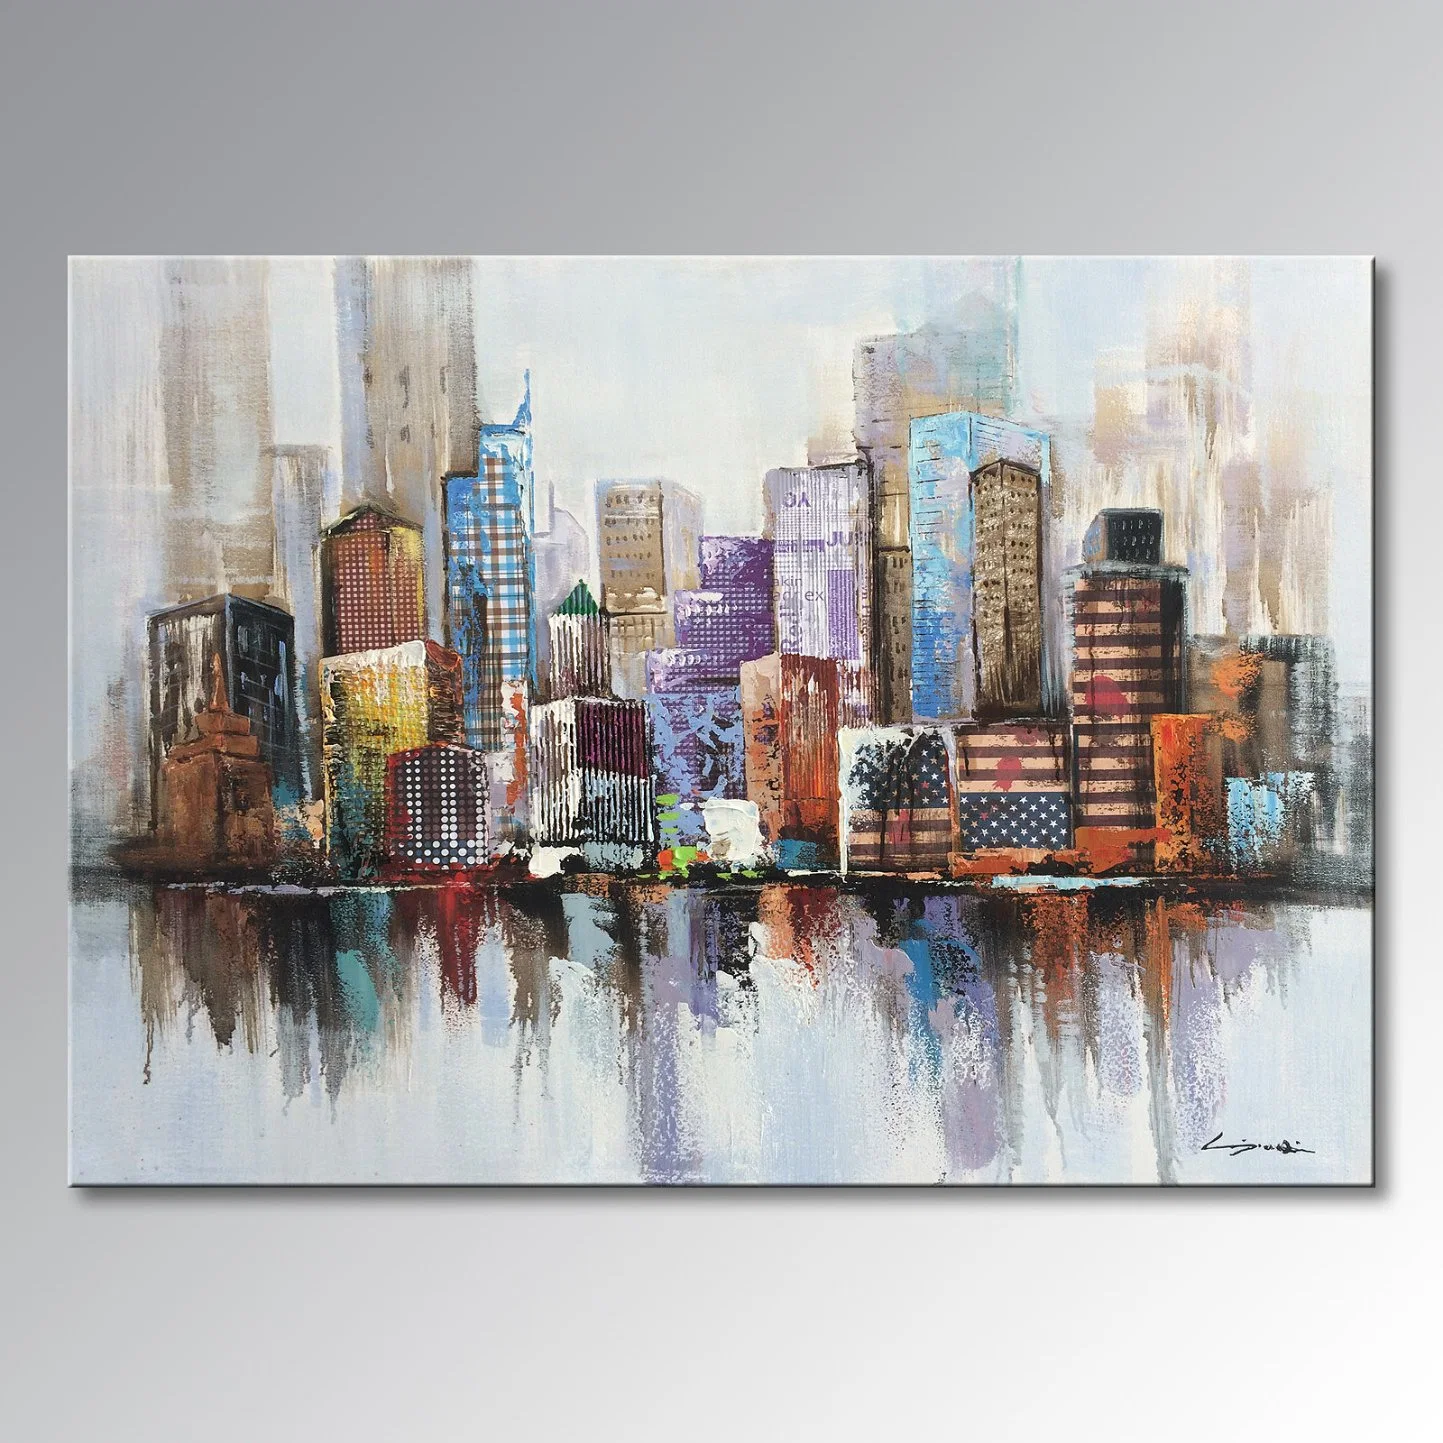 Handmade Cityscape Oil Painting on Canvas Abstract Wall Art Decor Picture